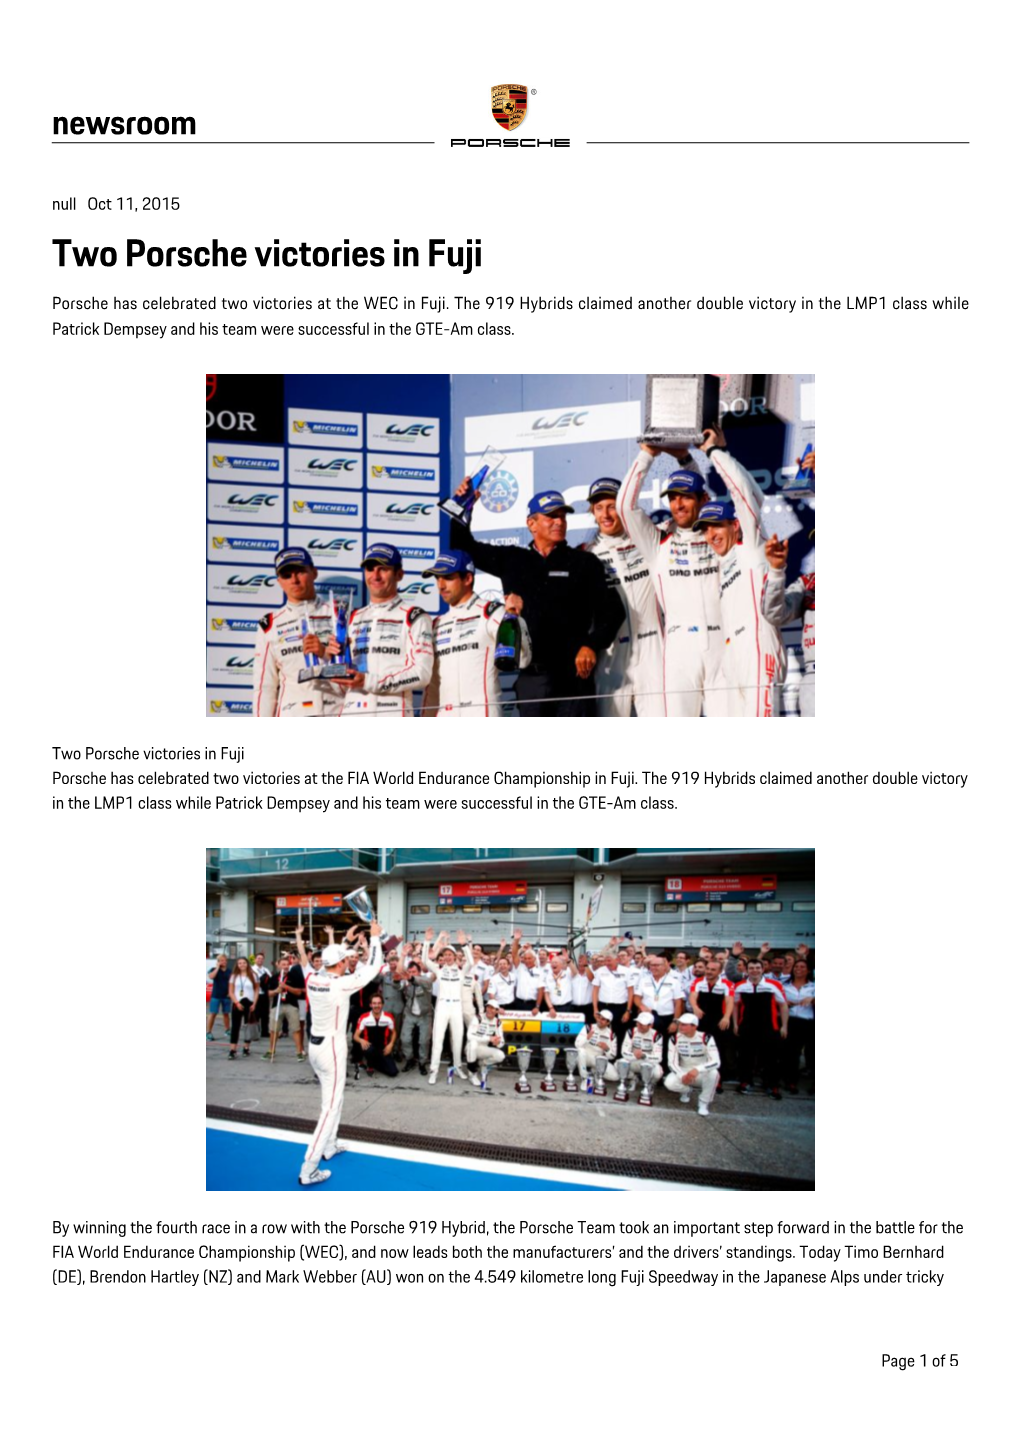 Two Porsche Victories in Fuji Porsche Has Celebrated Two Victories at the WEC in Fuji